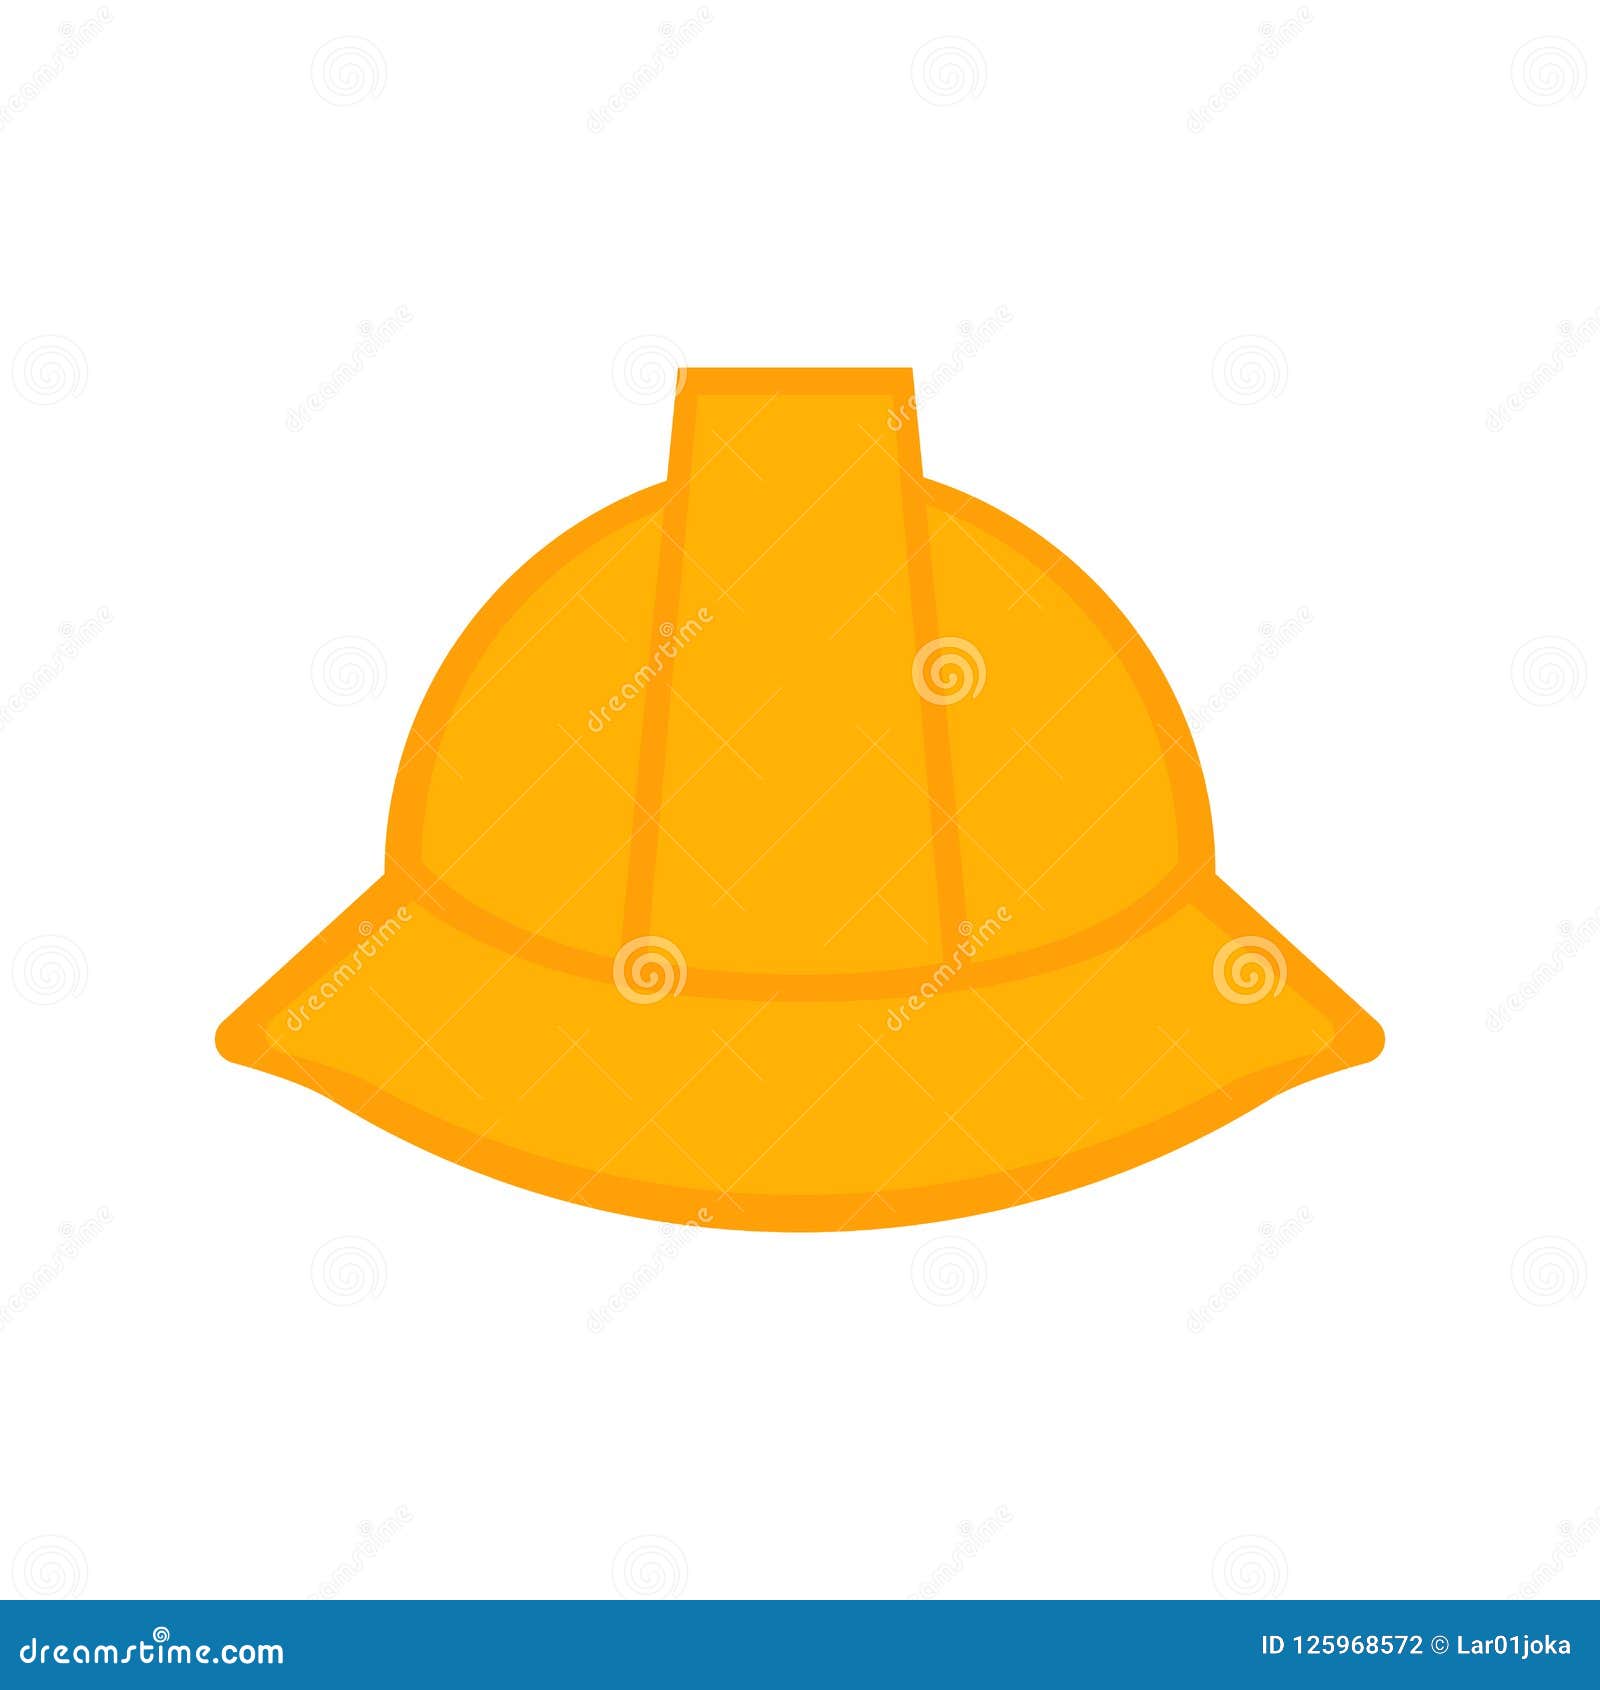 Isolated engineer hat icon stock vector. Illustration of head - 125968572